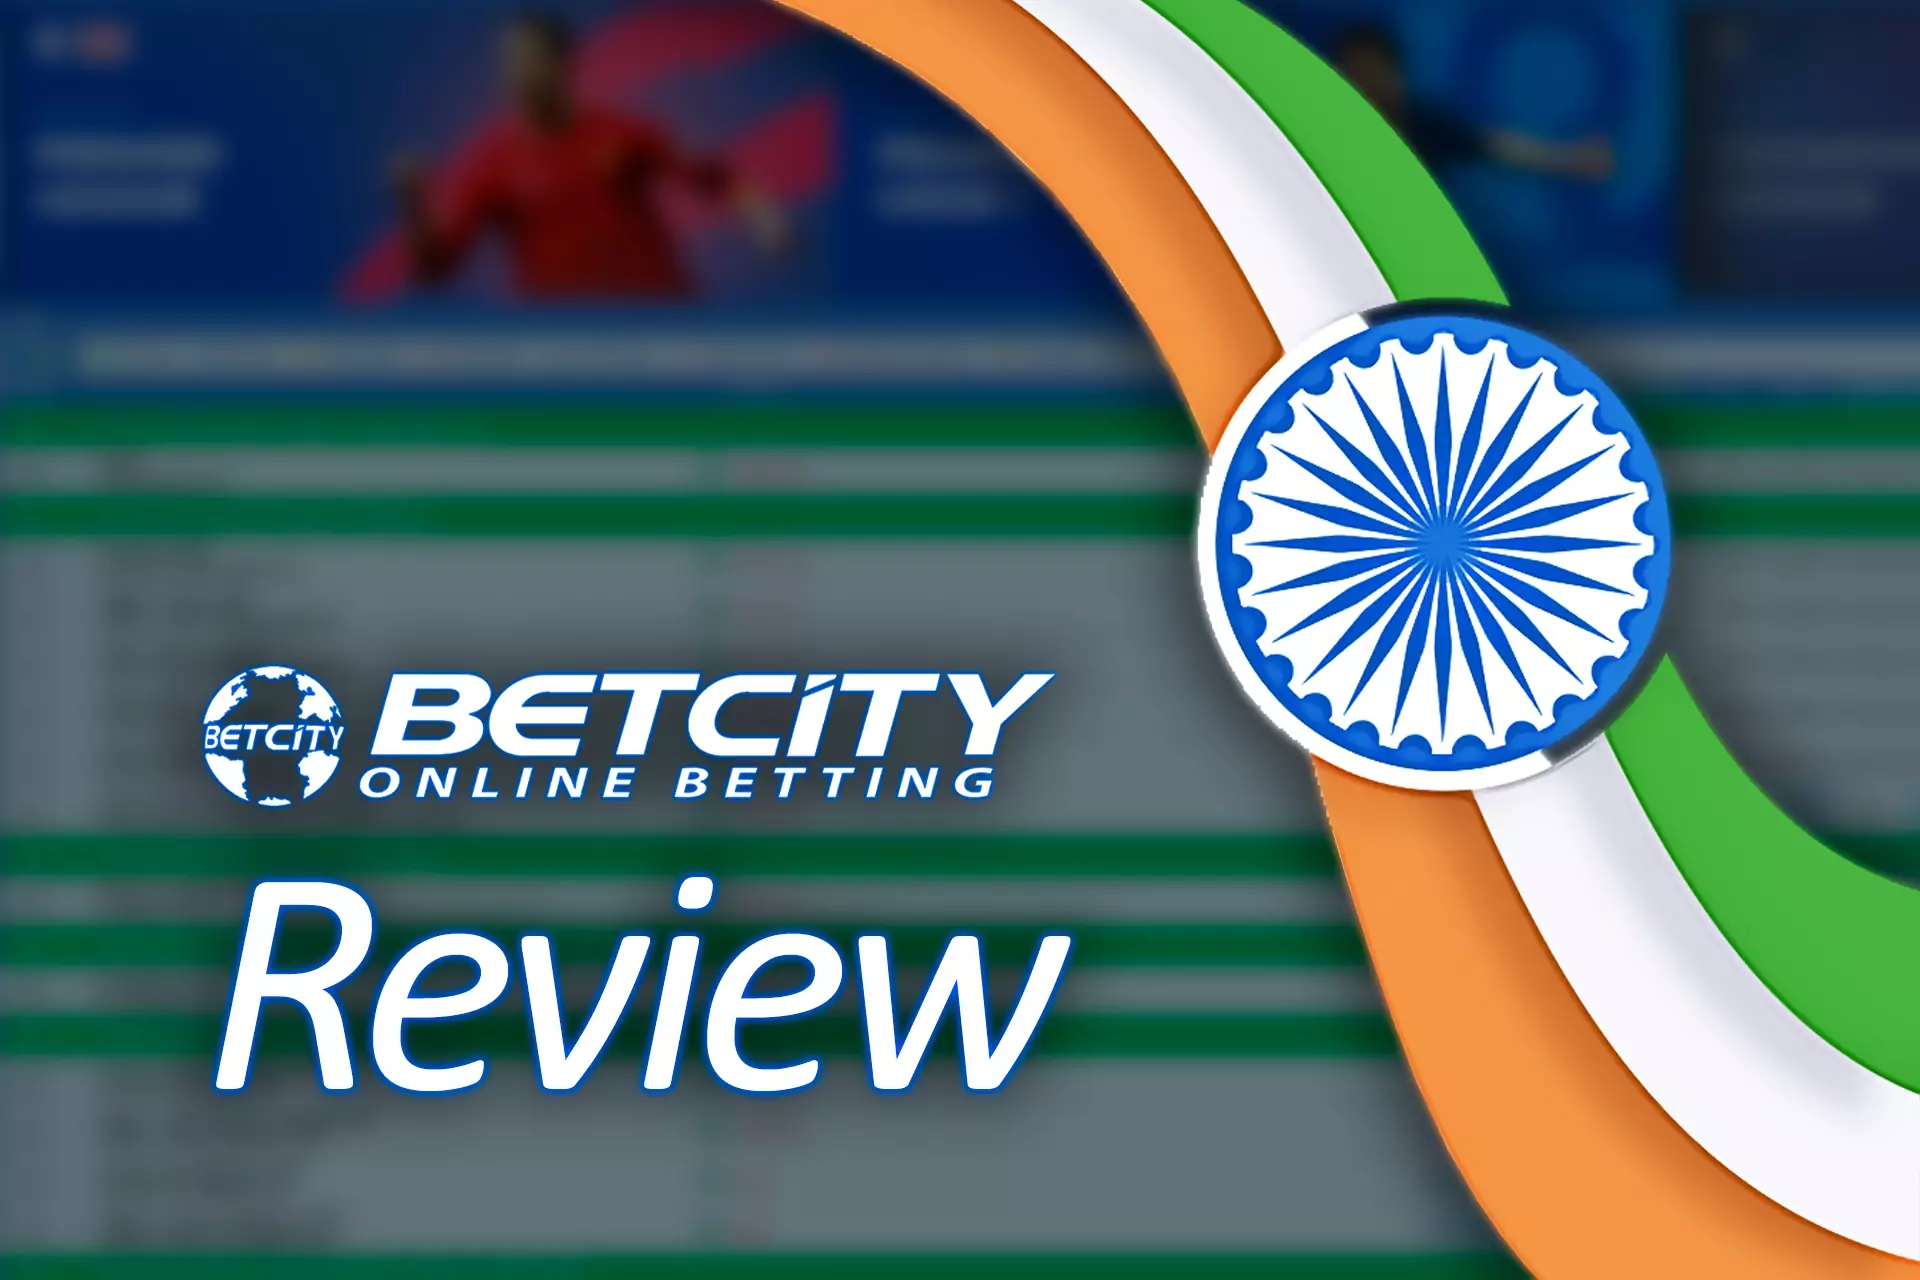 The Betcity team developed a well-designed site that would be liked by users from India.